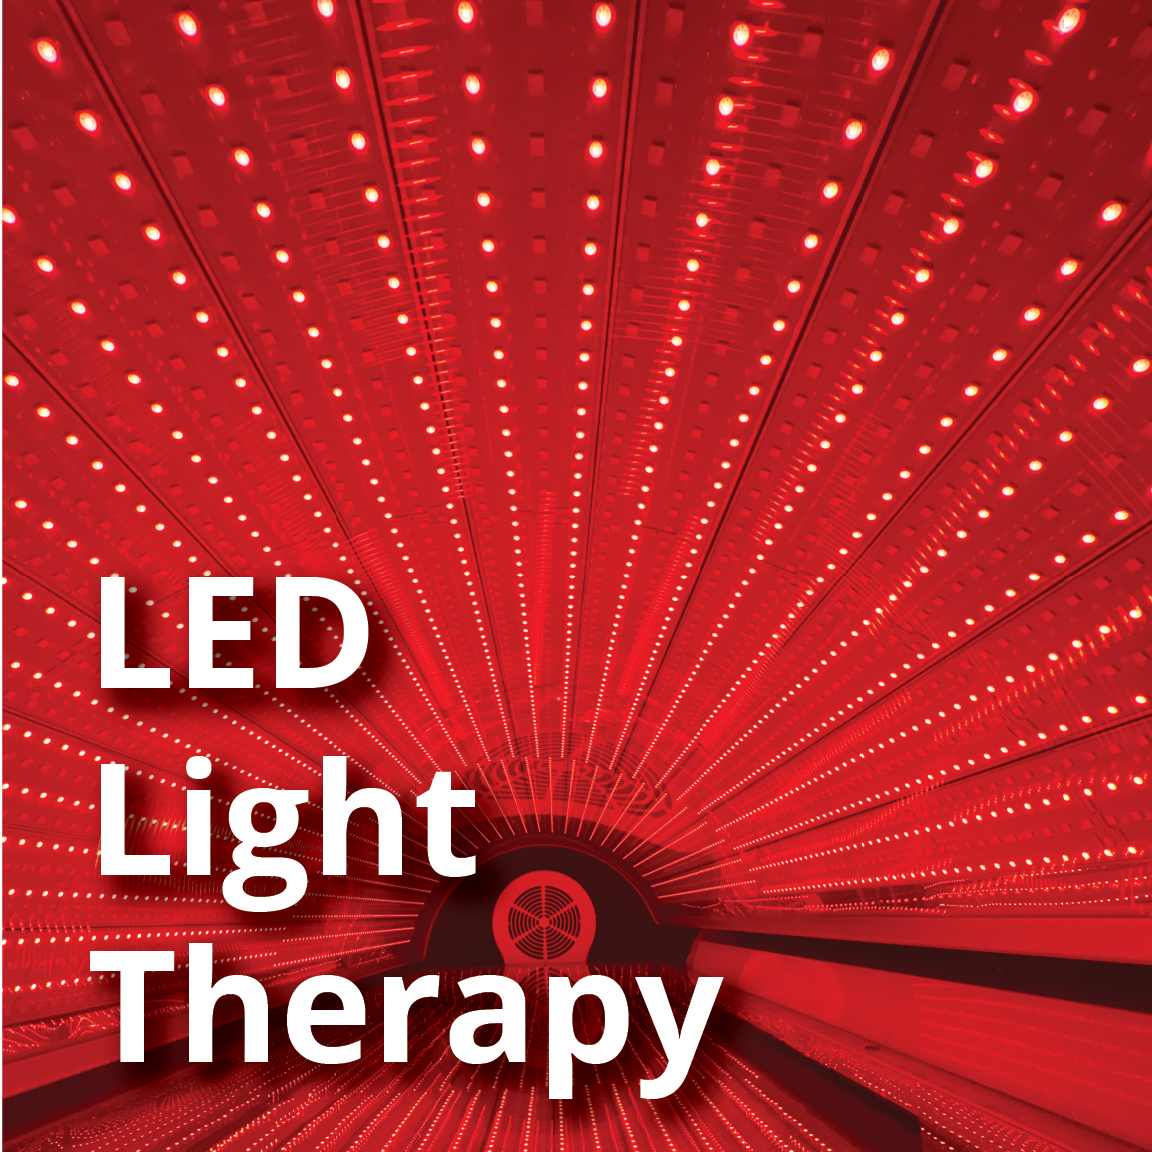 Comparing⁣ Red Light ⁣Therapy to Traditional Pain Treatments